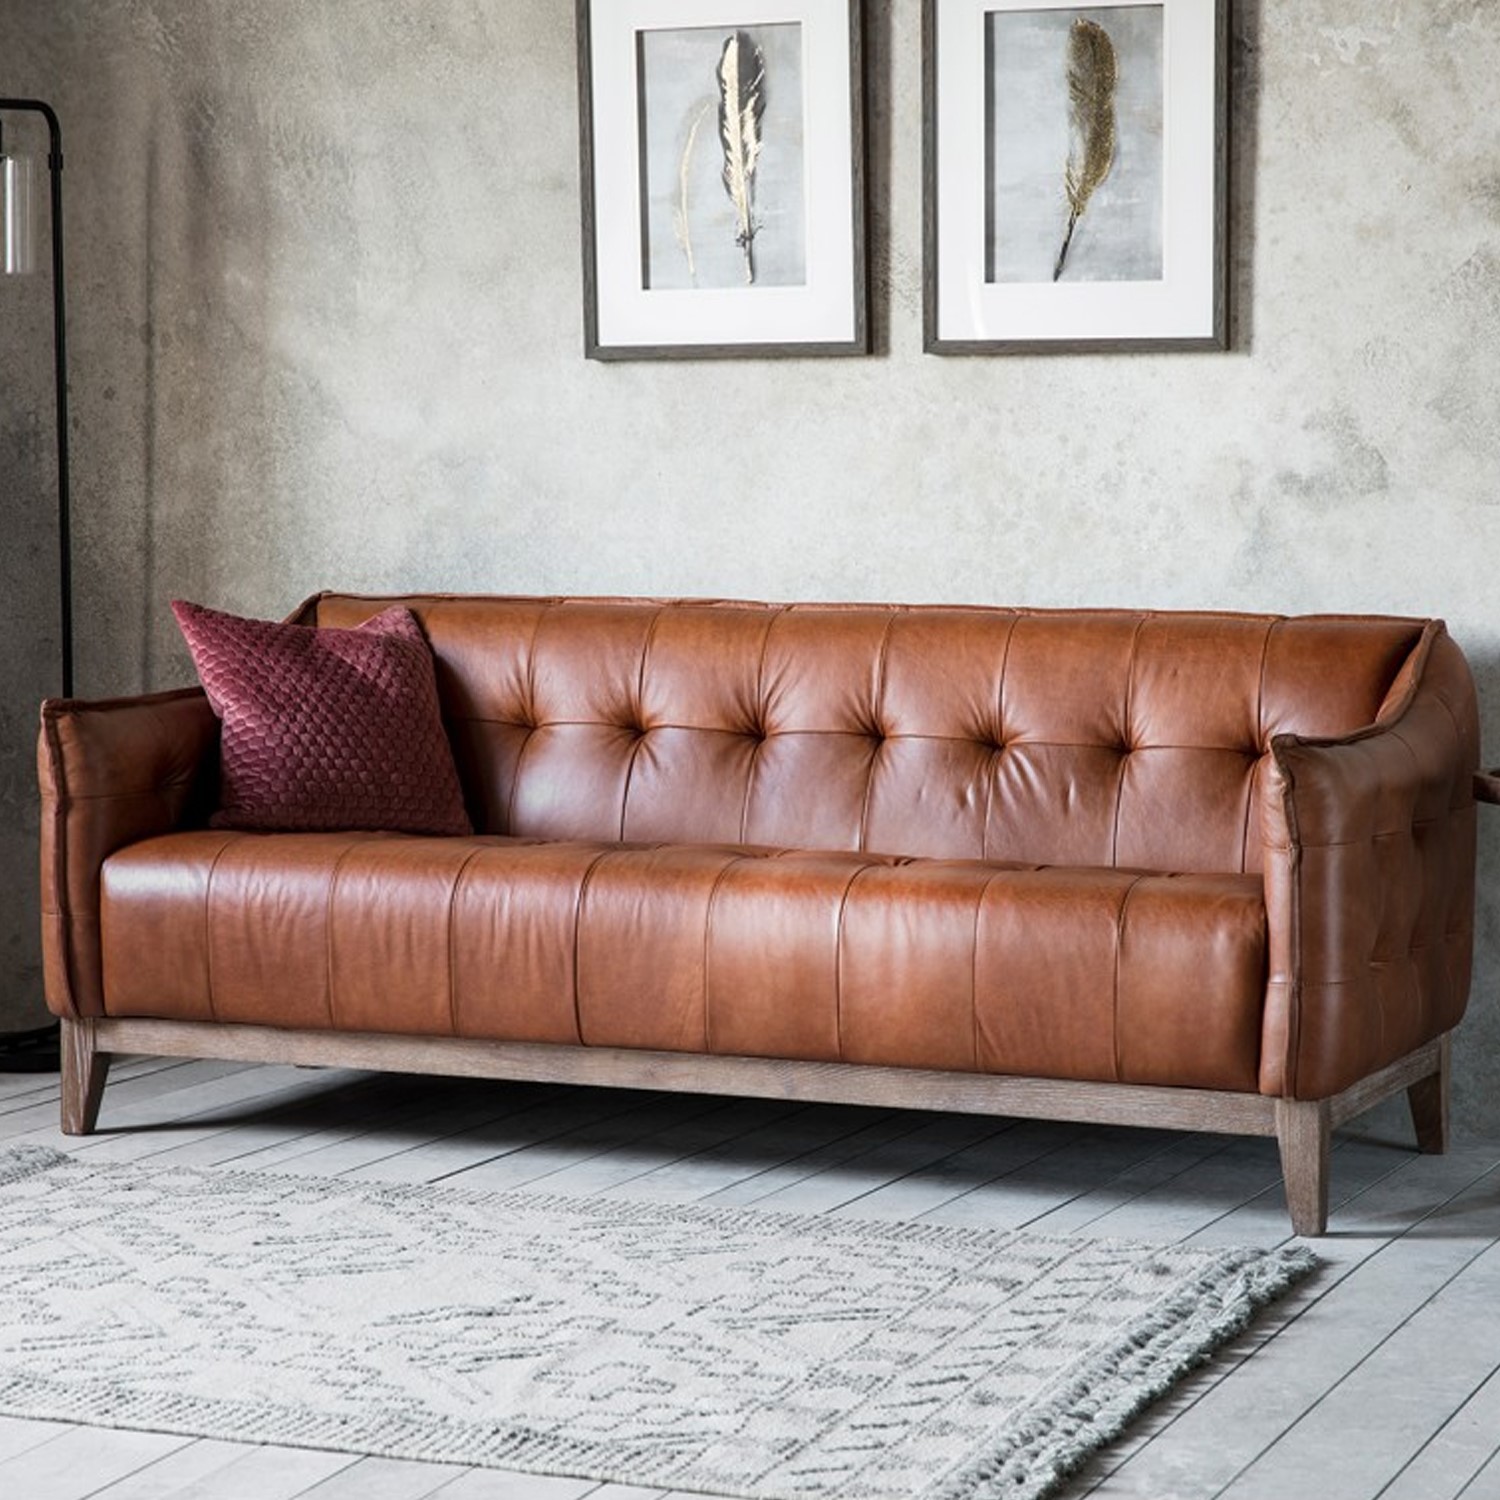 Brown Leather 3 Seater Tufted Sofa - Caspian House - Furniture123